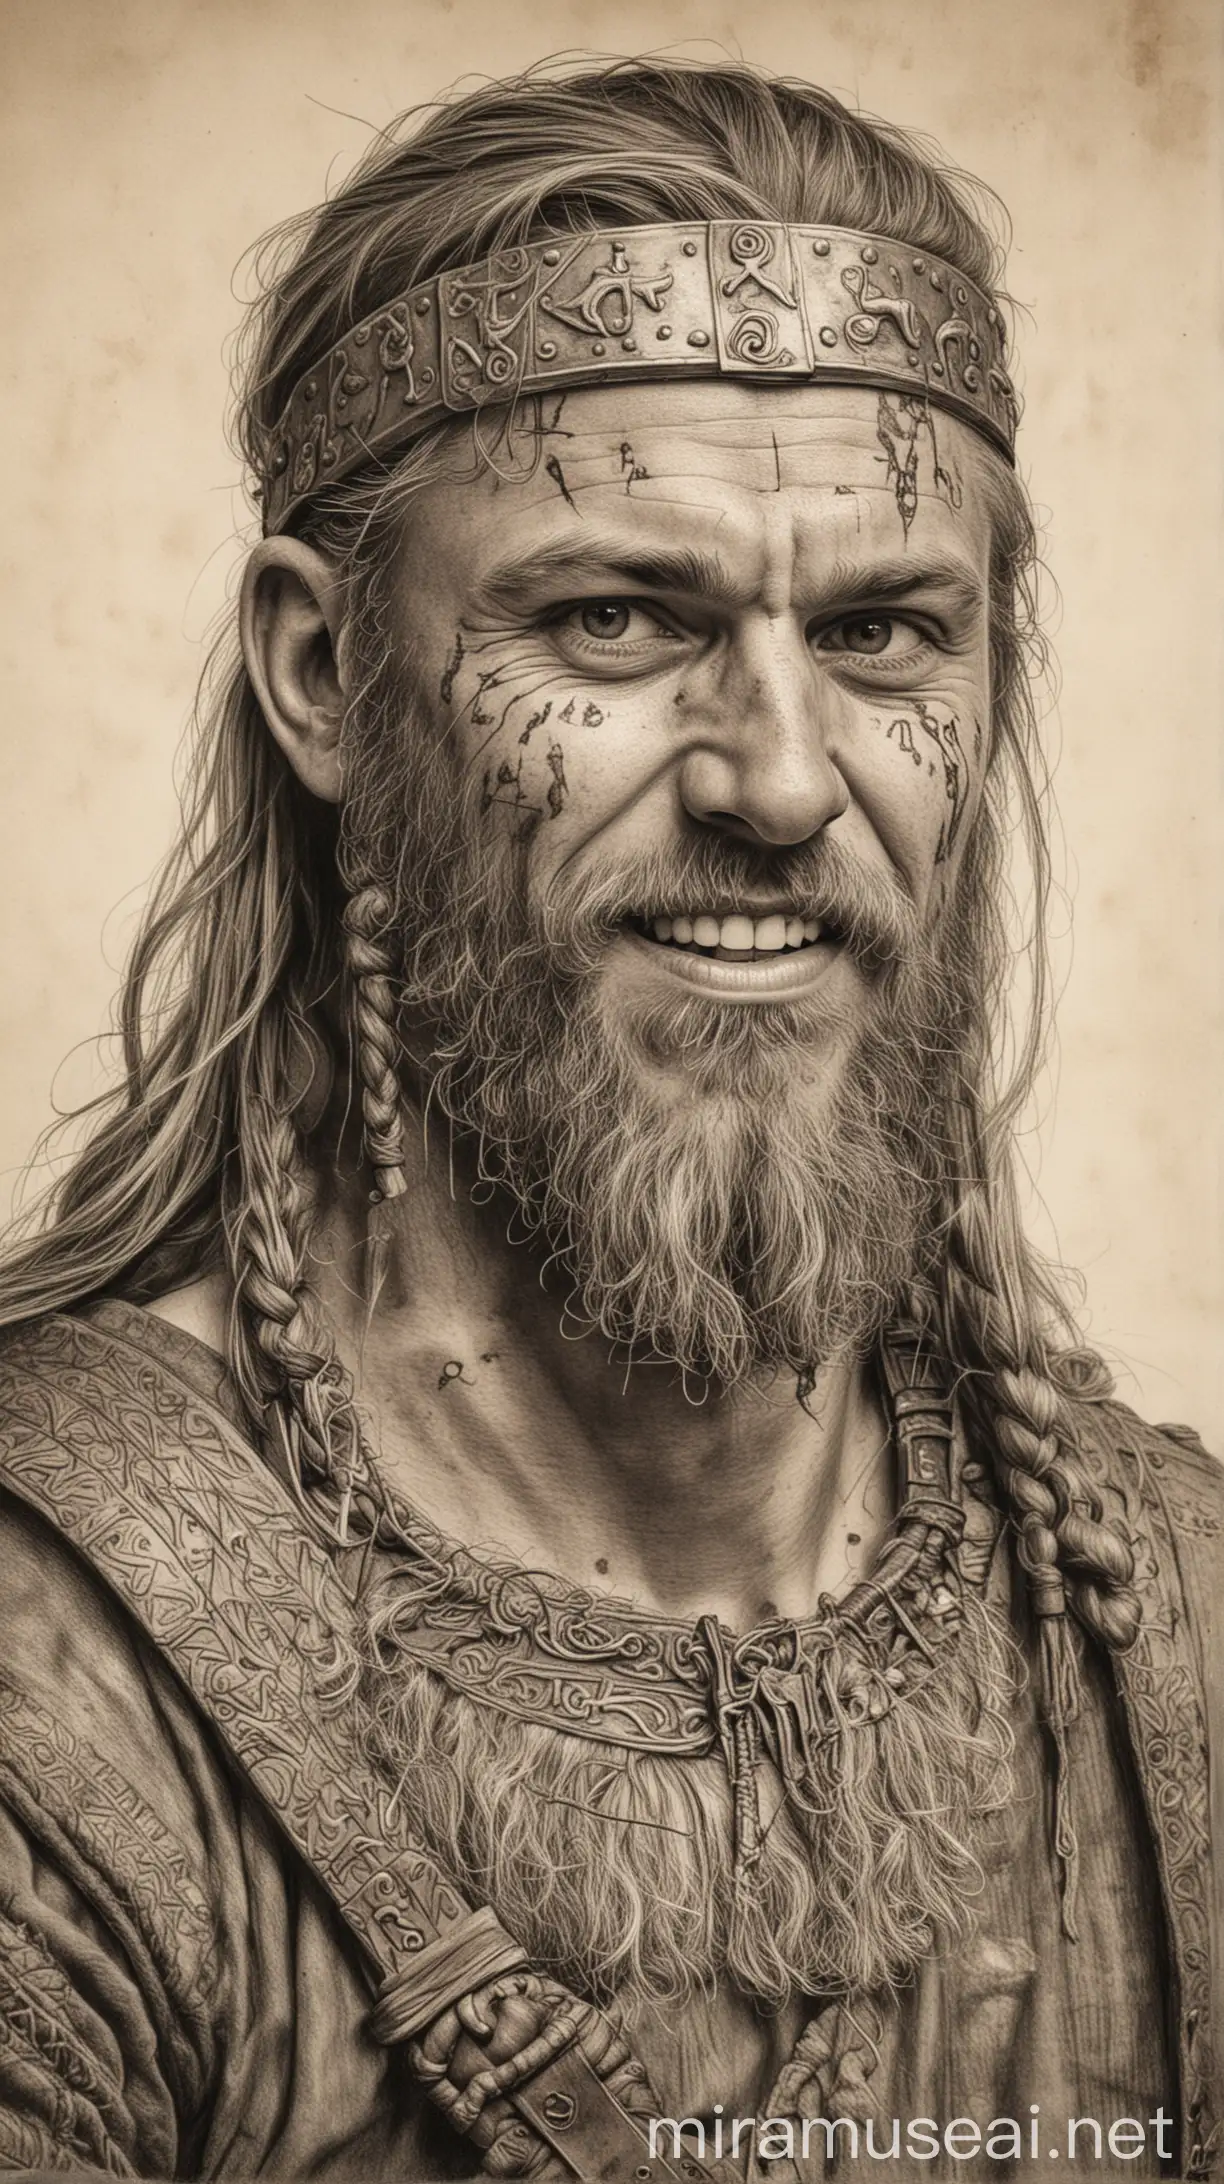 Viking Merchant Guild Member with Marked Teeth Illustration